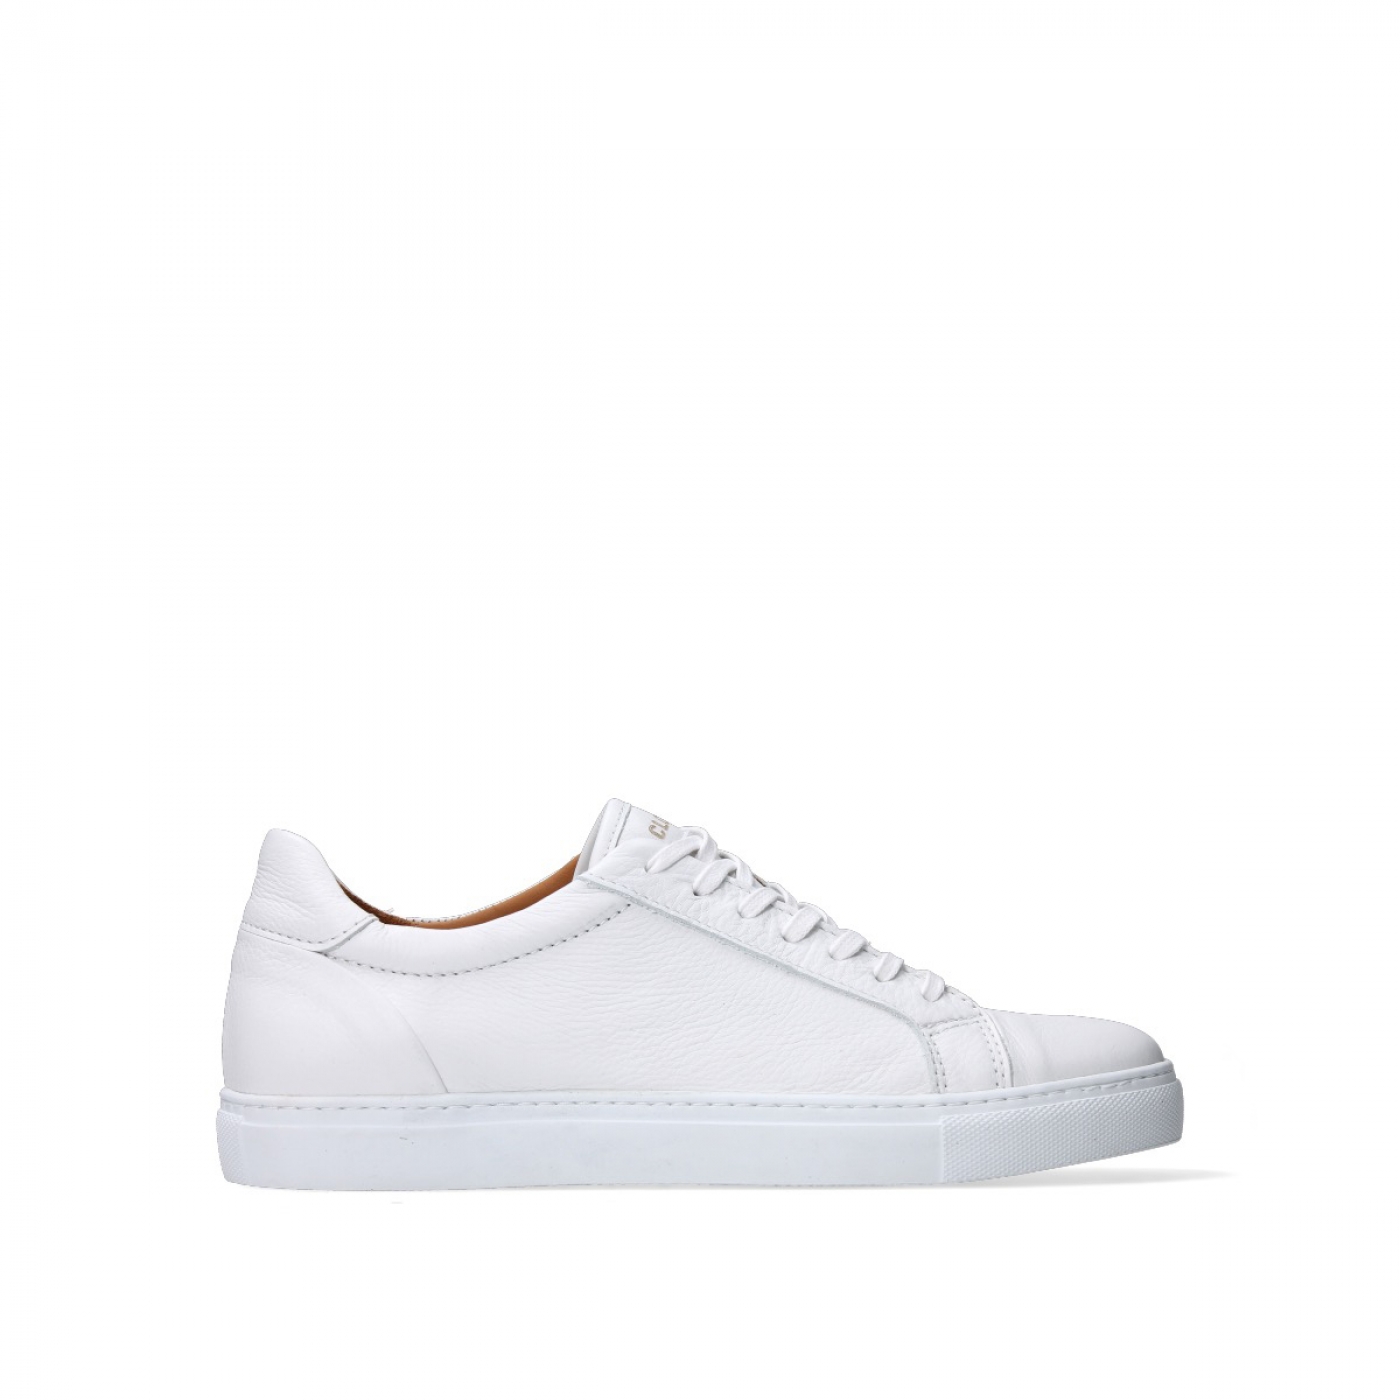 Wolky Shoes 09483 Forecheck white leather order now! Biggest Wolky ...